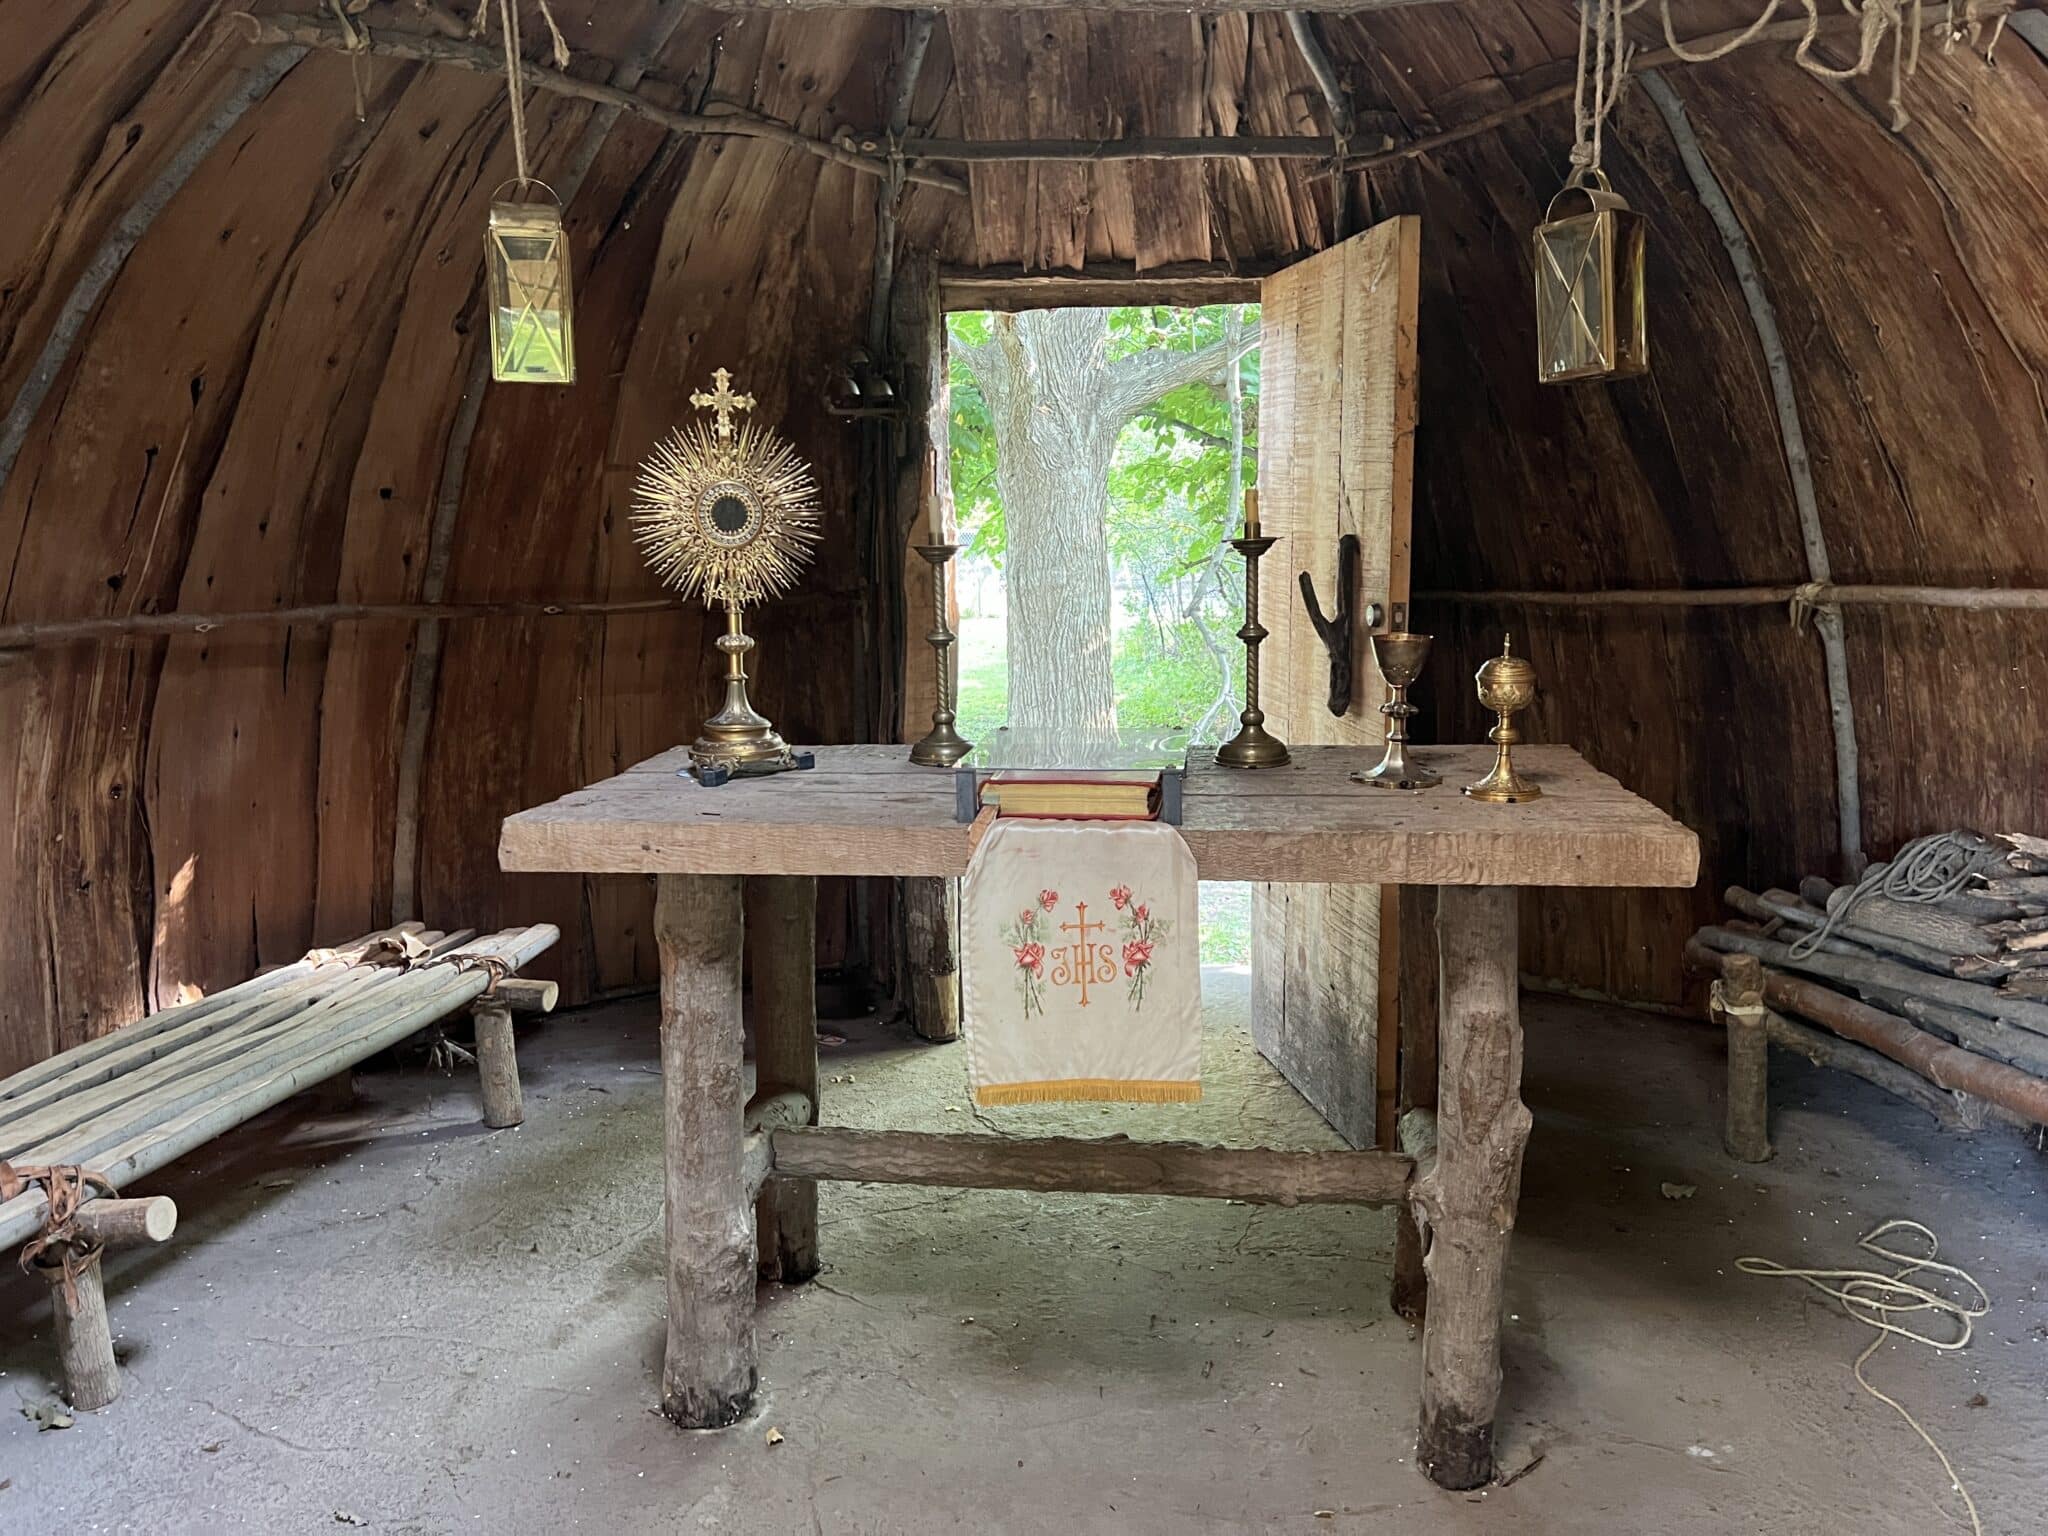 The inside of the bark chapel replica in Green Bay’s Heritage Hill State Park shows how it was decorated for early catholic ceremonies. There is a gold cross along with a communion cup and an embroidered table covering atop a log table. 